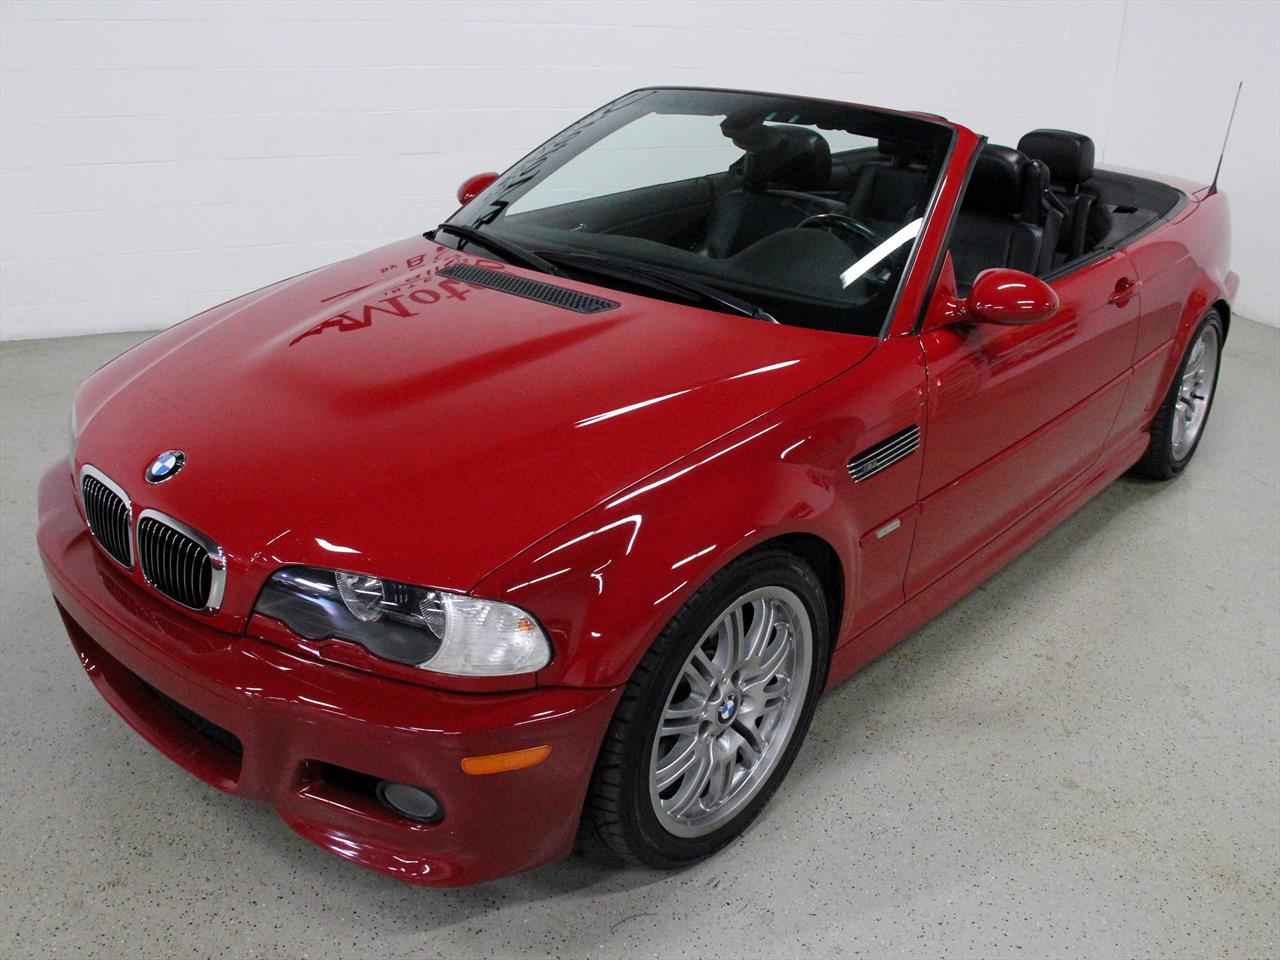 A Luxurious Driving Experience: The 2001 BMW M3 Convertible